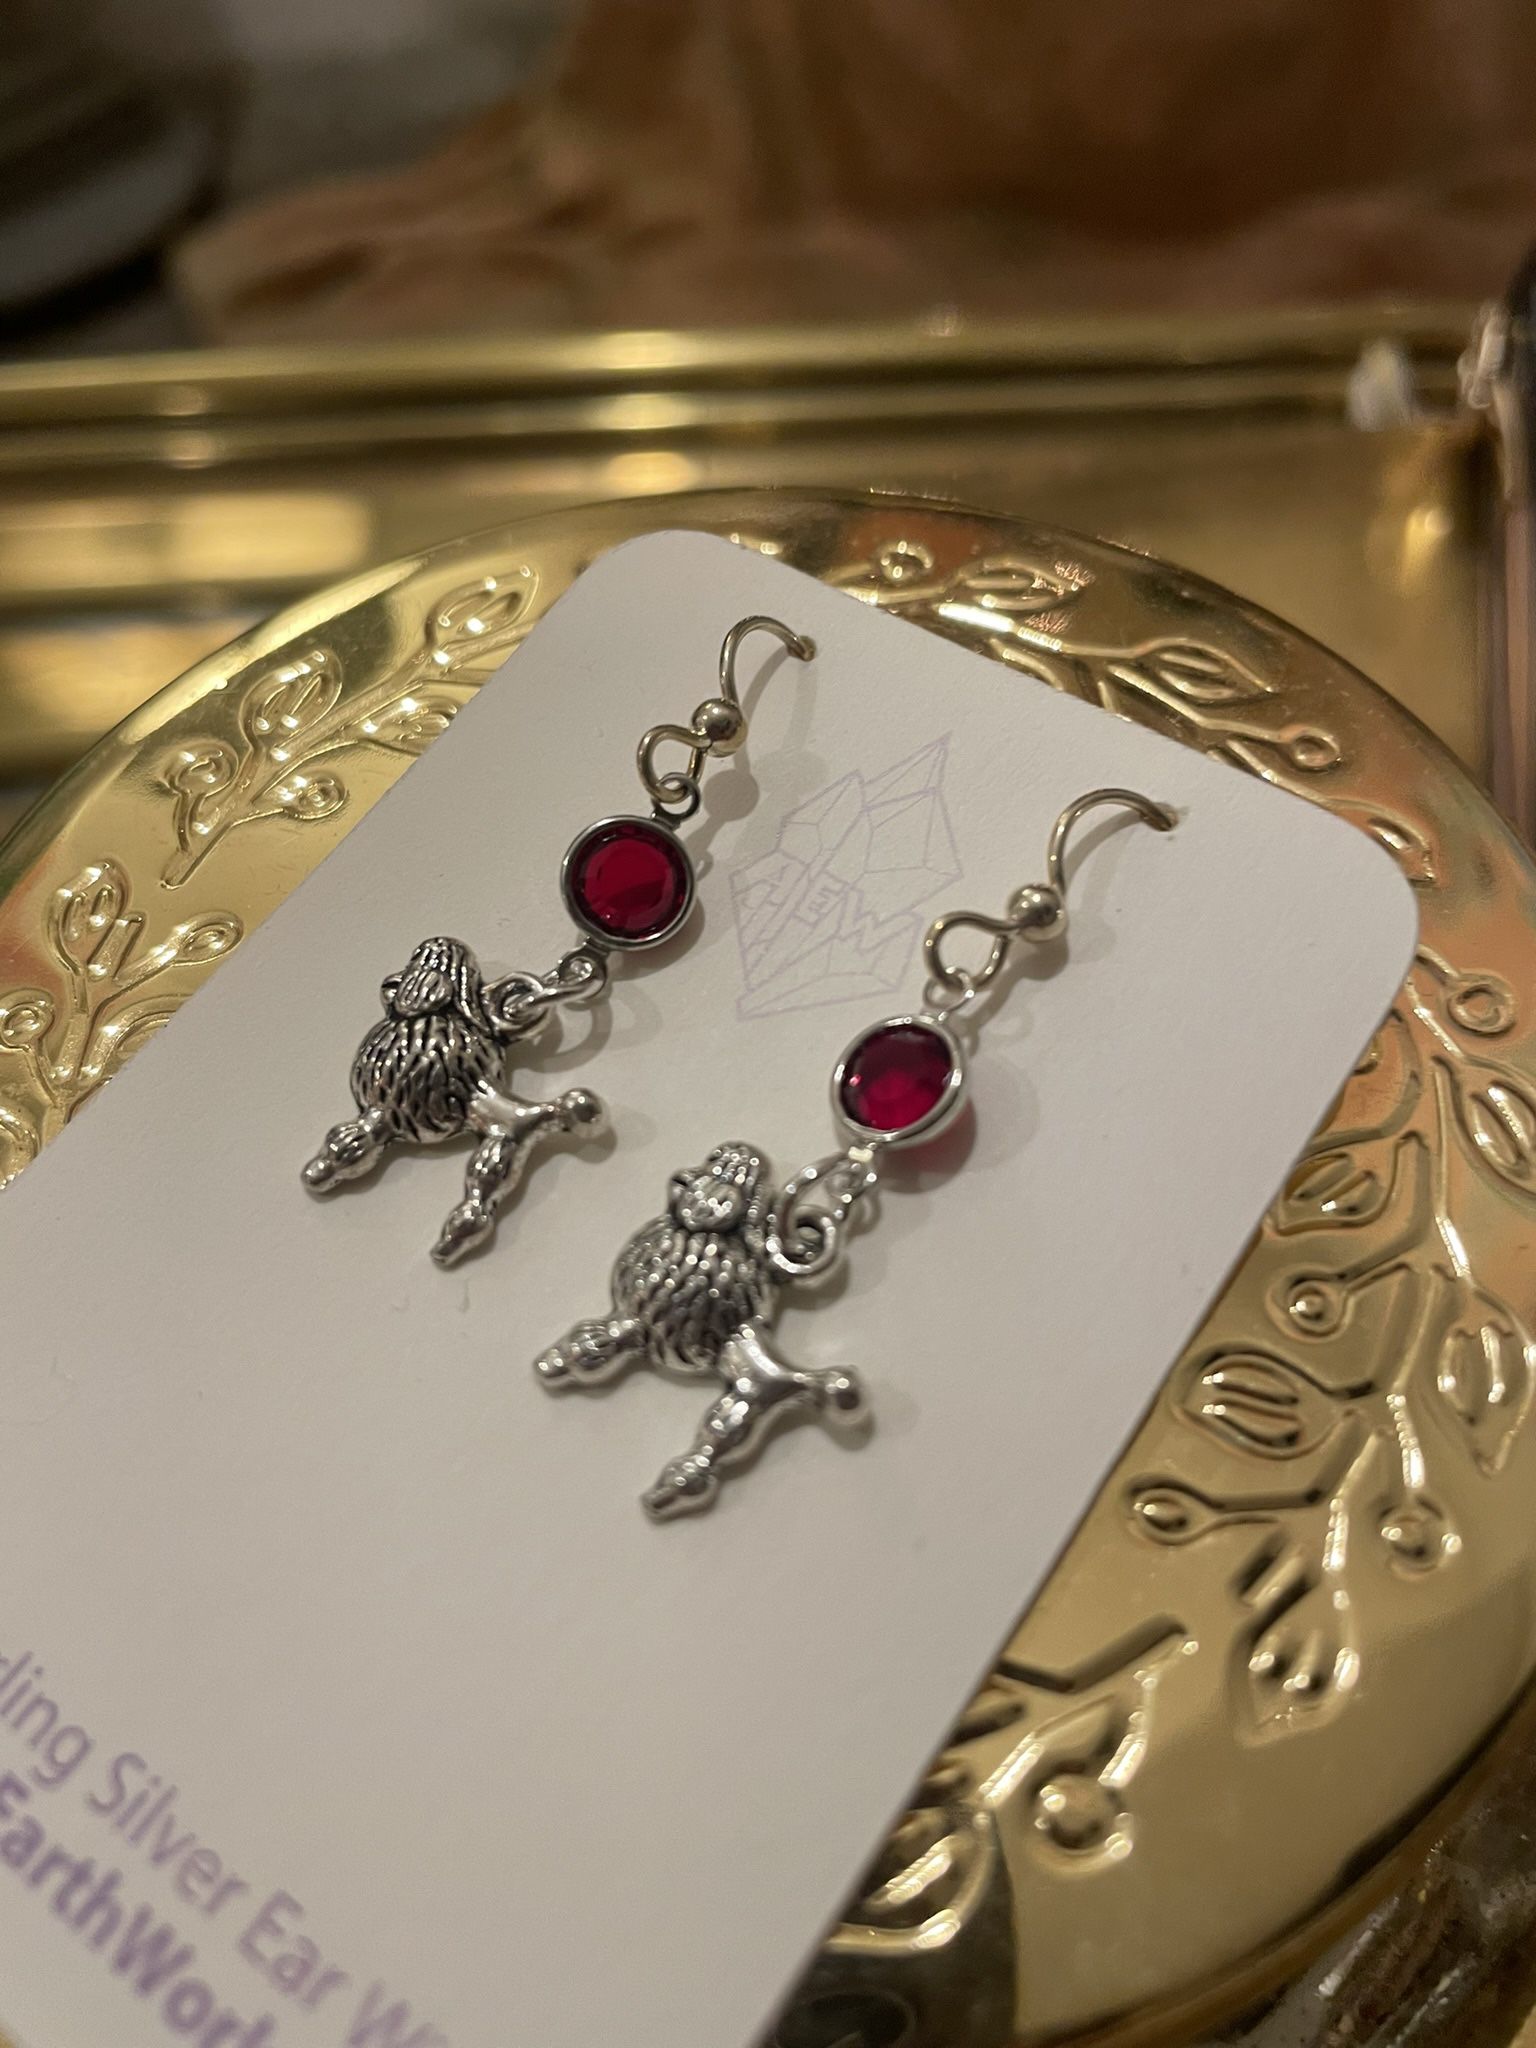 VALENTINE’S DAY GIFT - Sterling Silver & Garnet Poodle Earrings